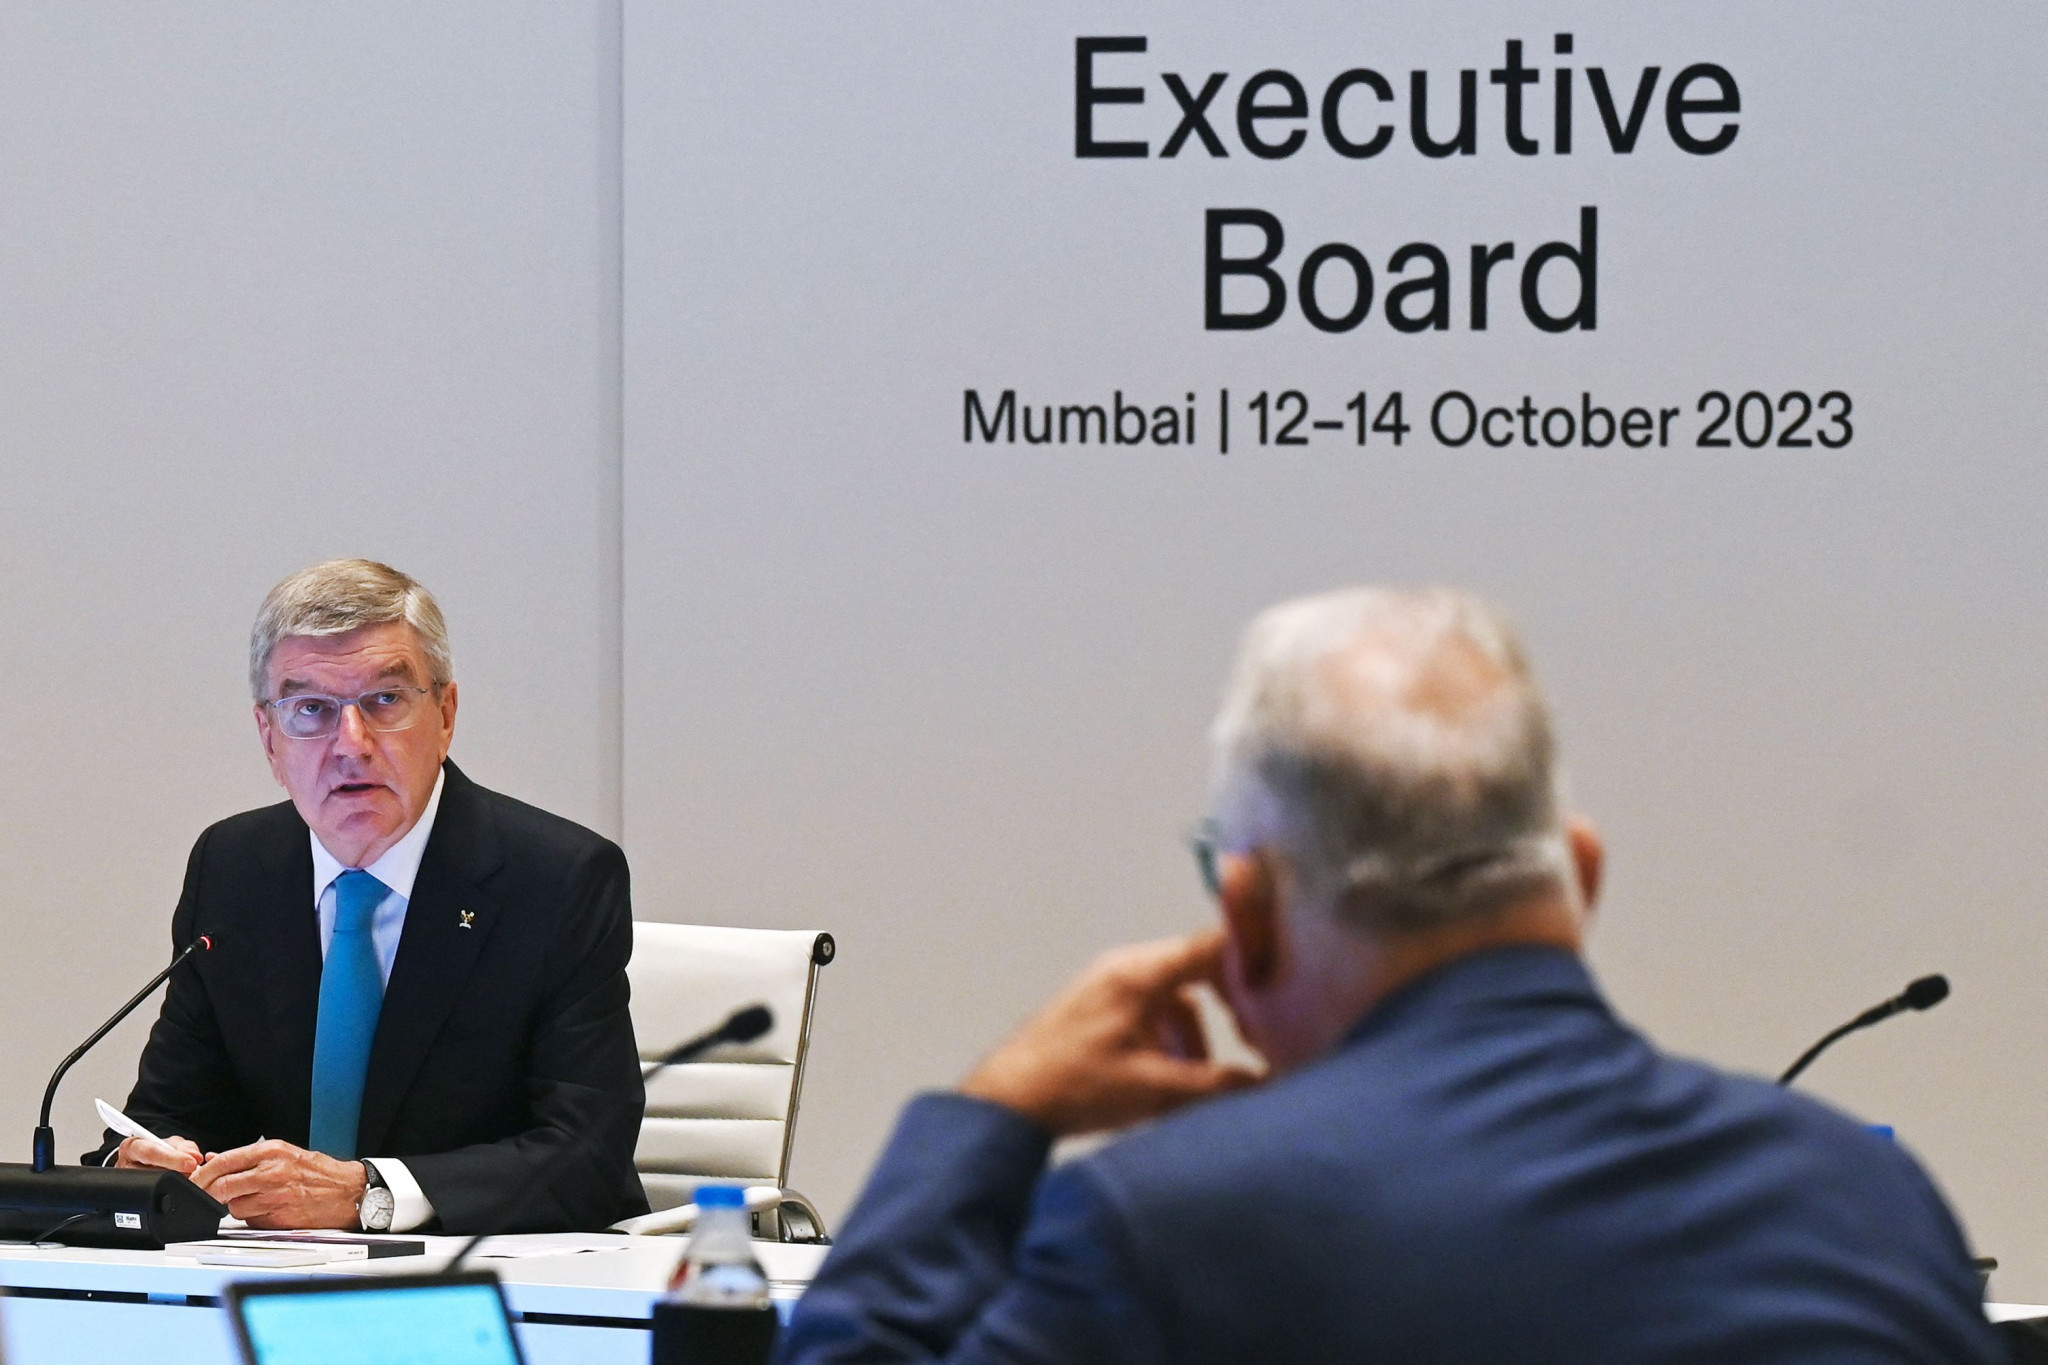 The IOC Executive Board decision was taken as the ROC's actions violate 